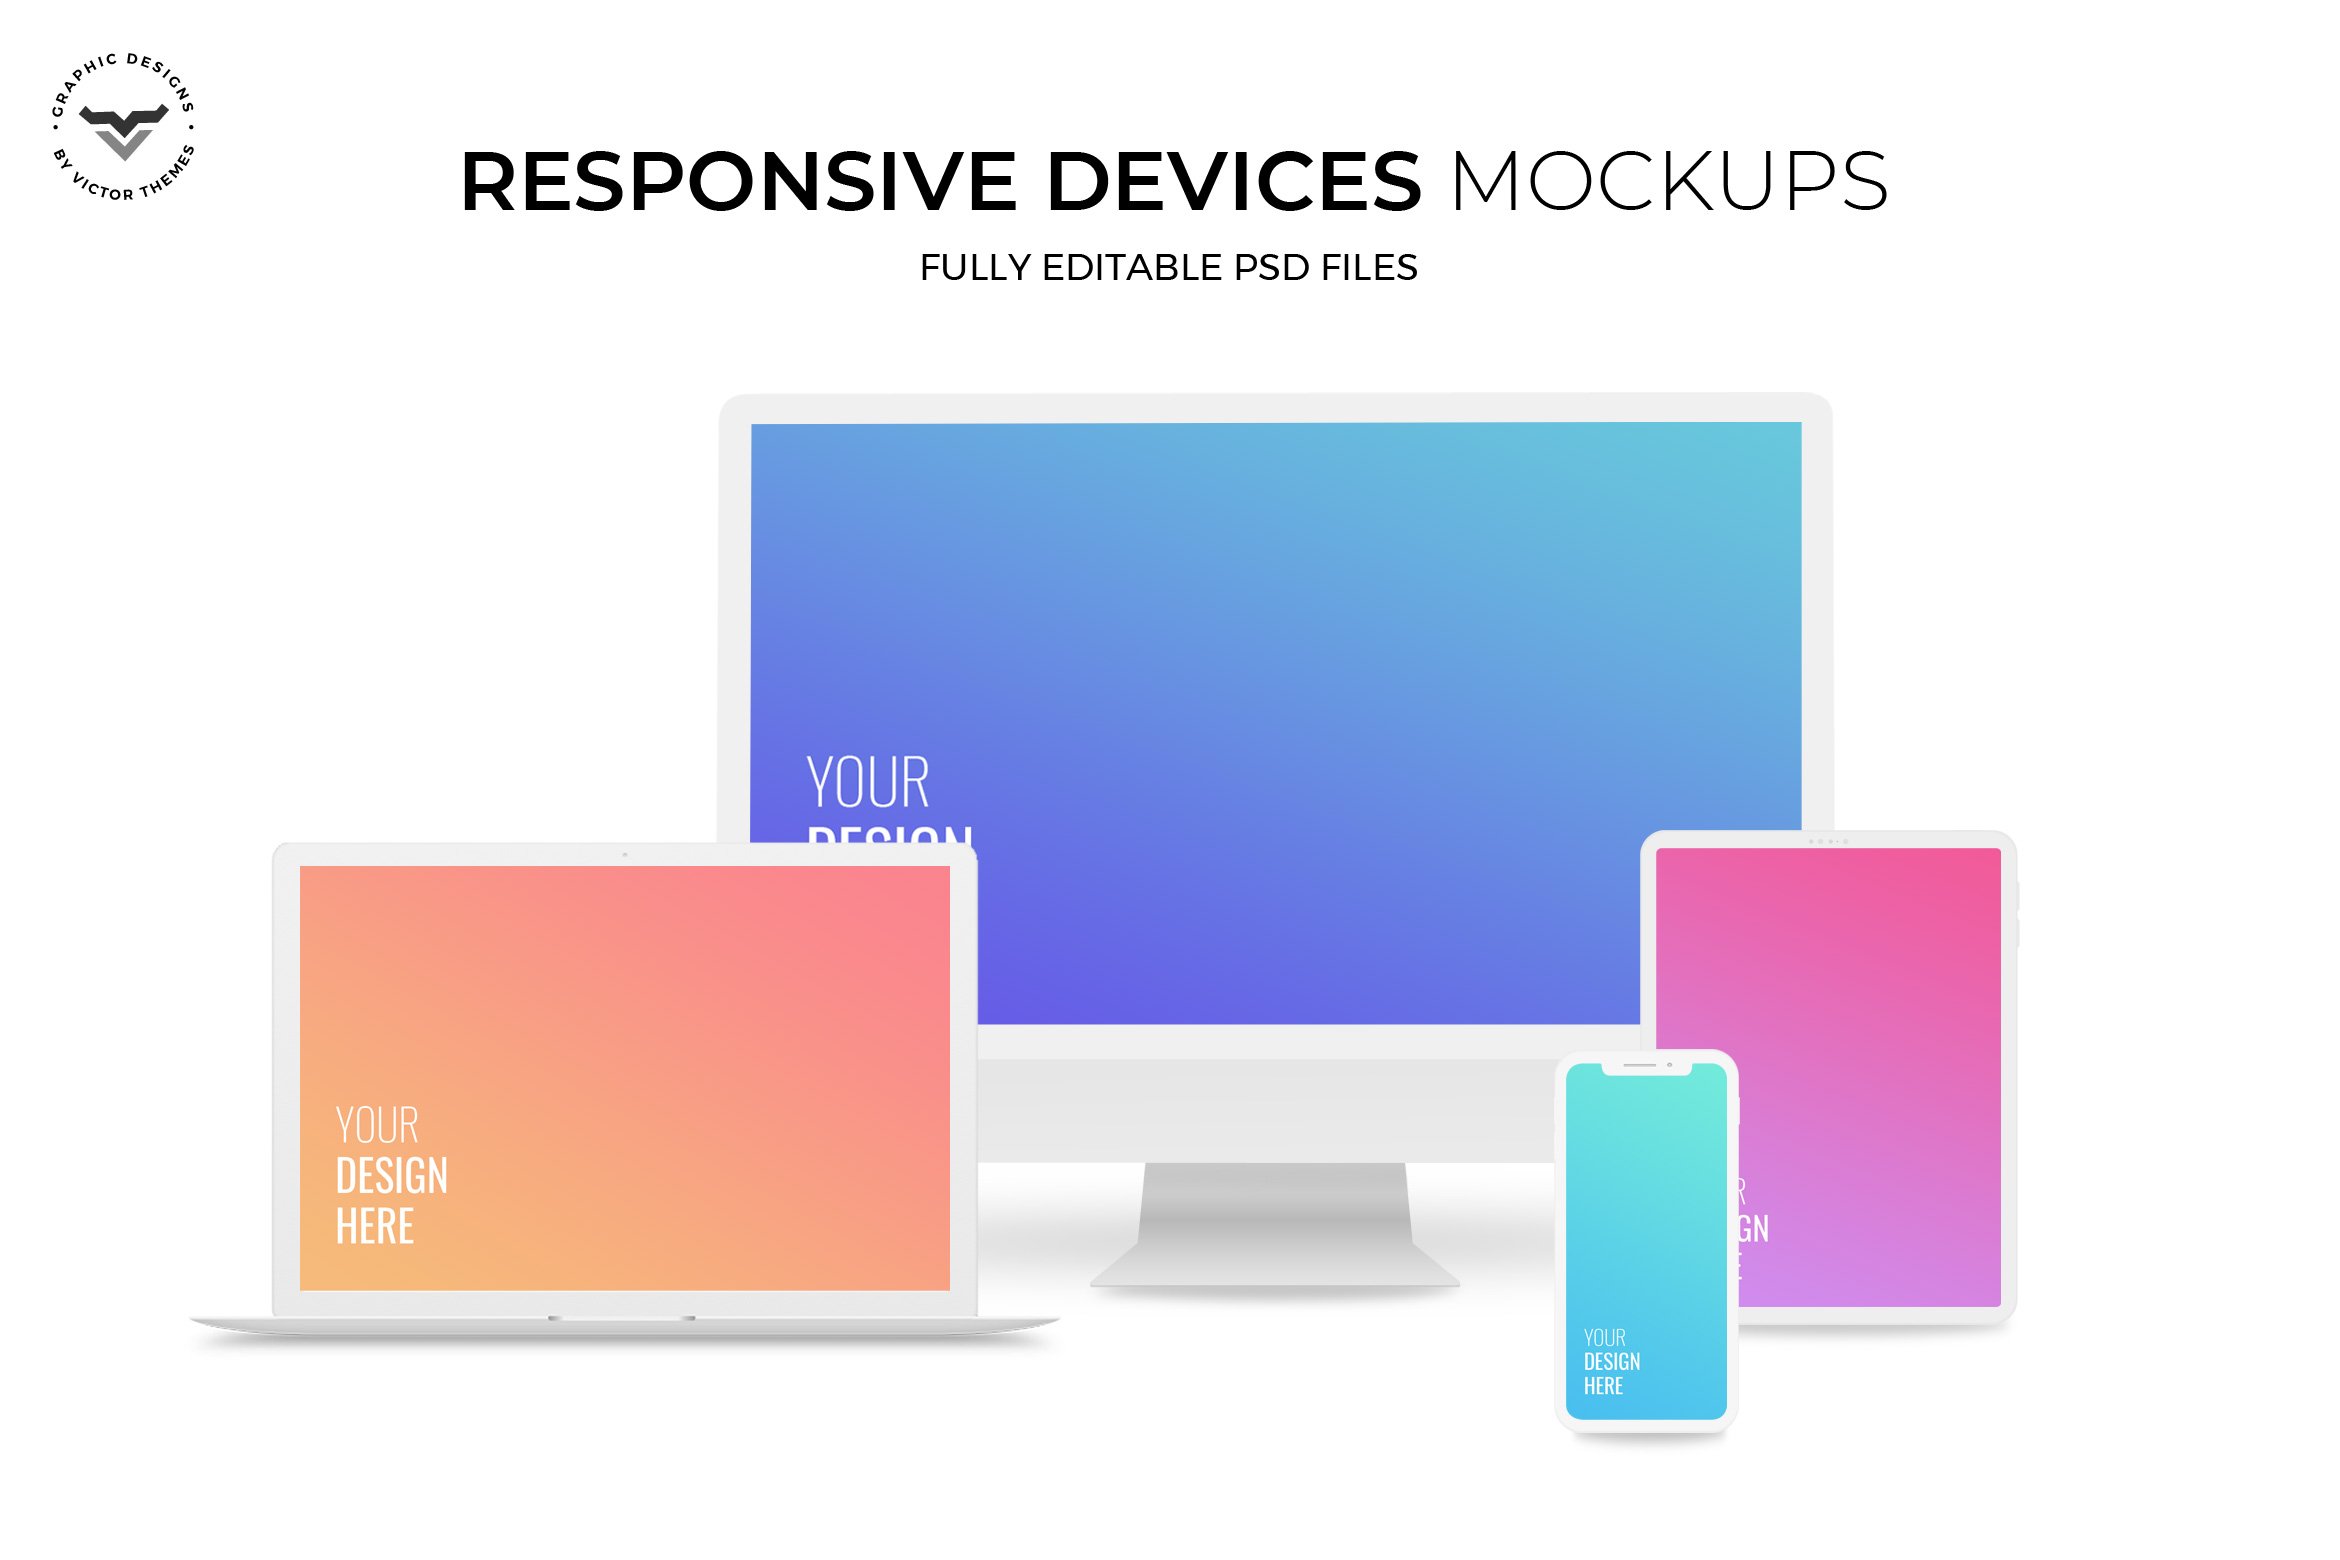 Responsive Devices Mockups